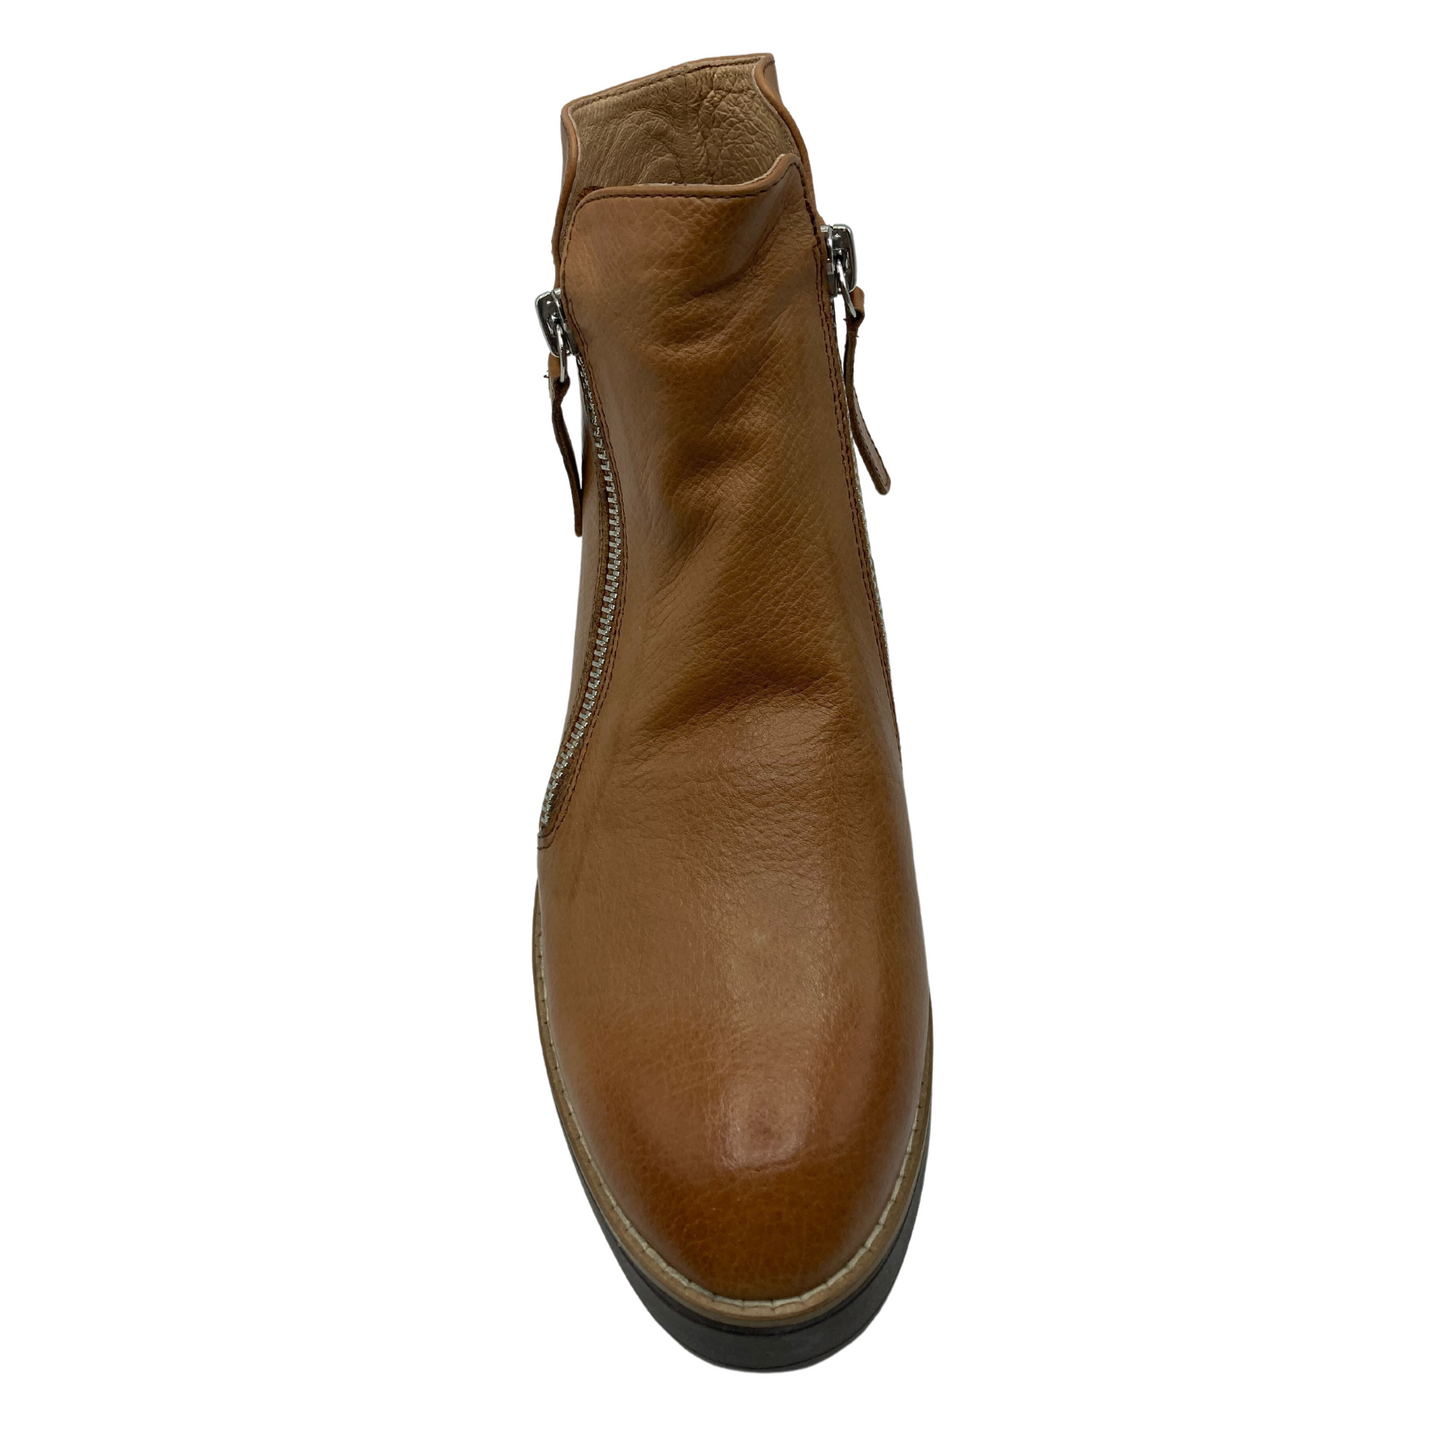 Top view of short brown leather boot with double zippers and rounded toe